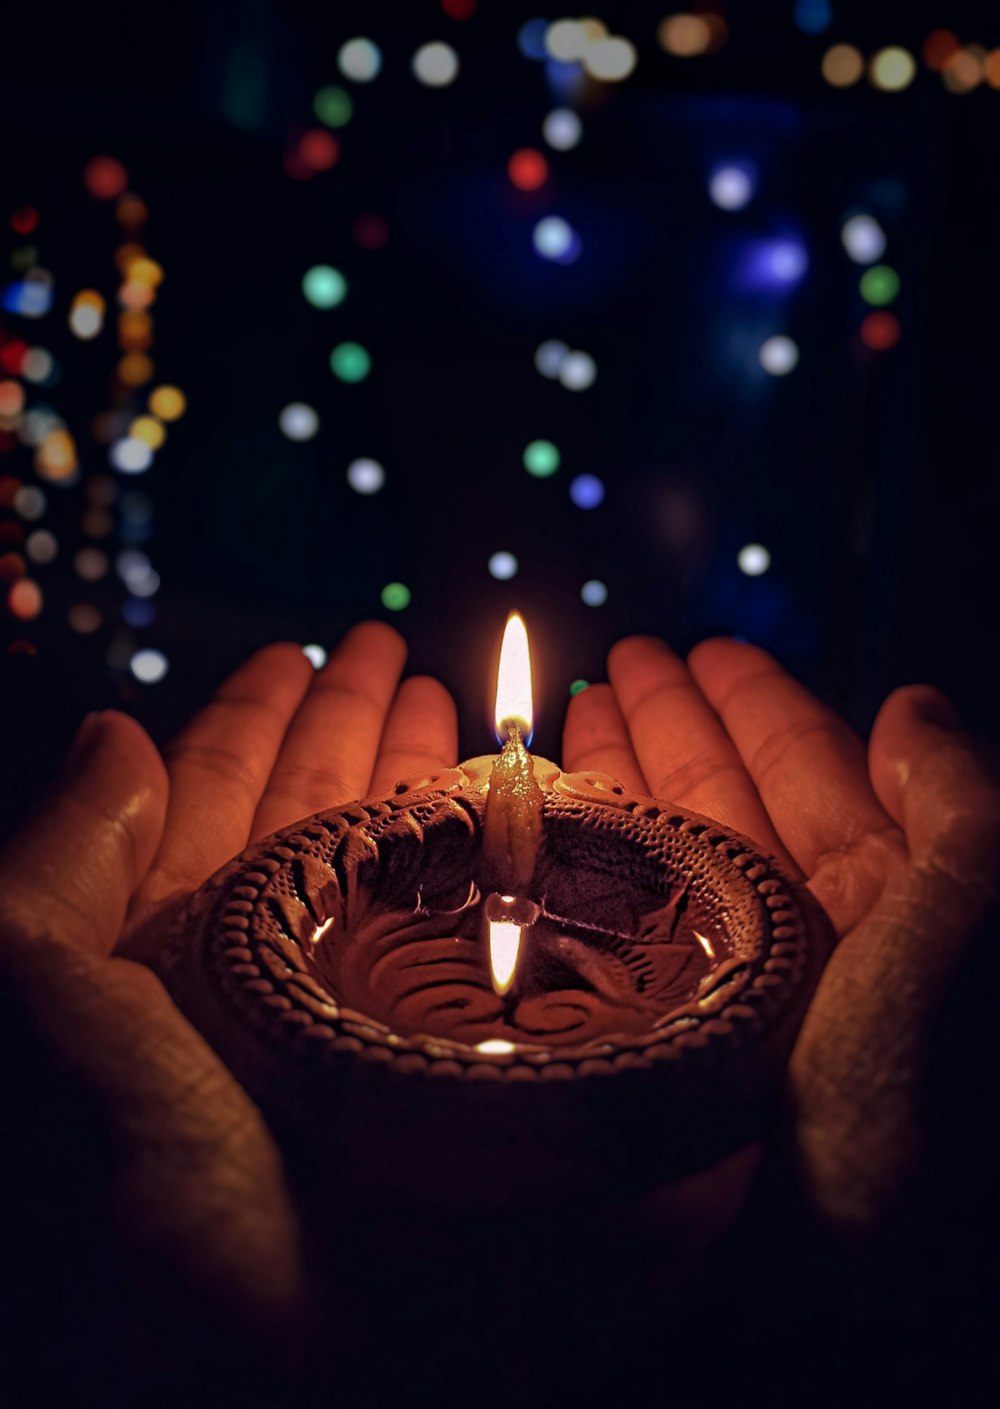 The Ultimate Collection of Diwali Images HD – Stunning High-Quality Images in Full 4K Resolution